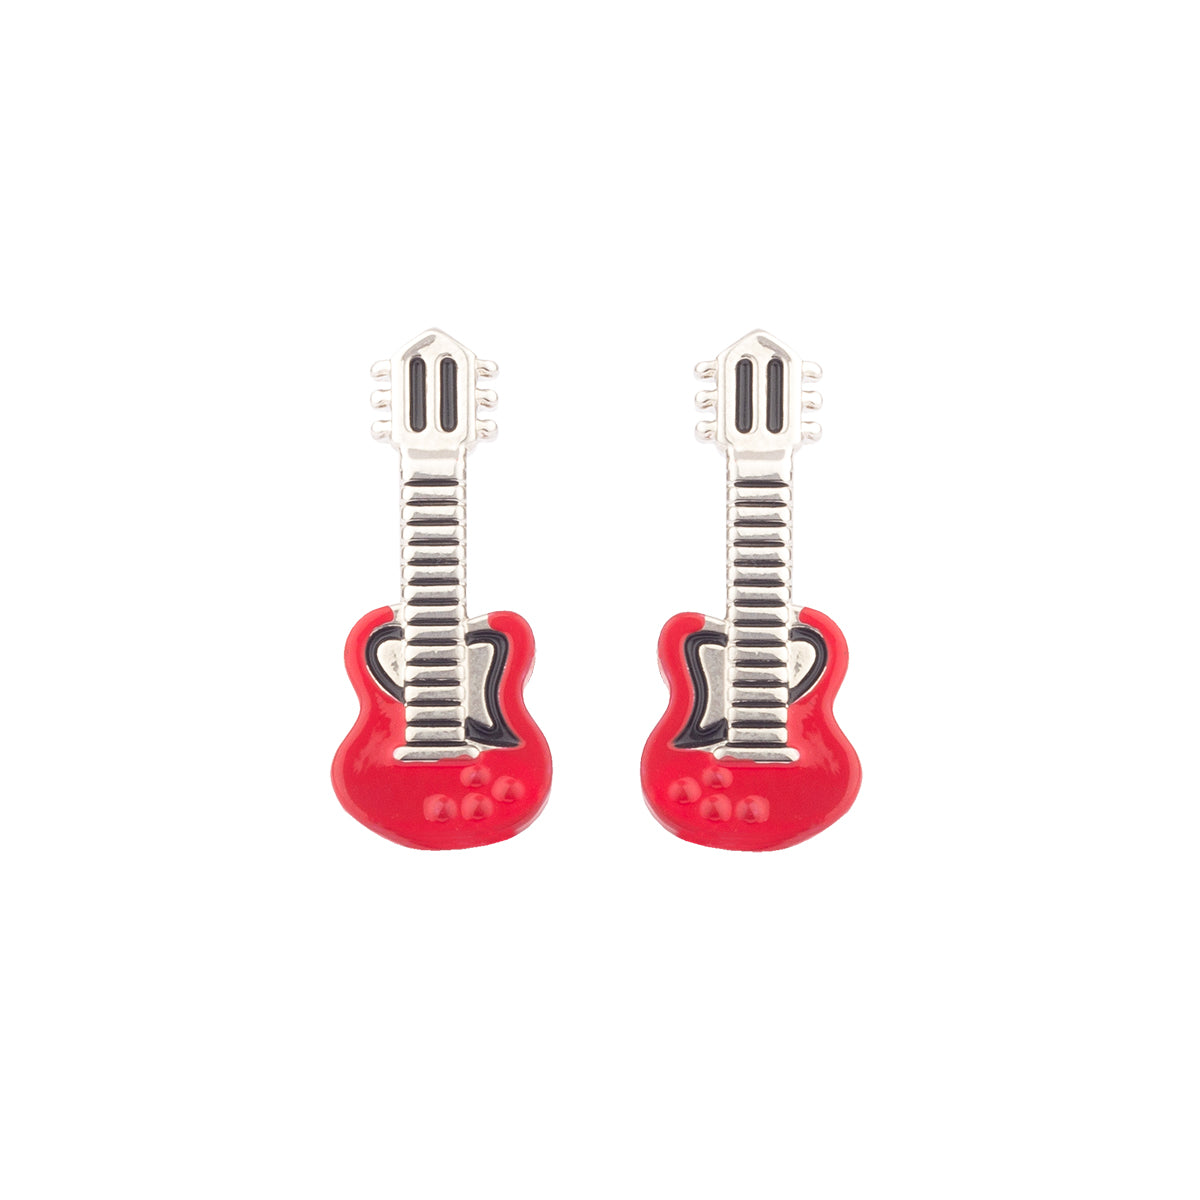 Let your taste of music trickle to your statement fashion choices! Get ready to rock in our raging red guitar cufflinks. 